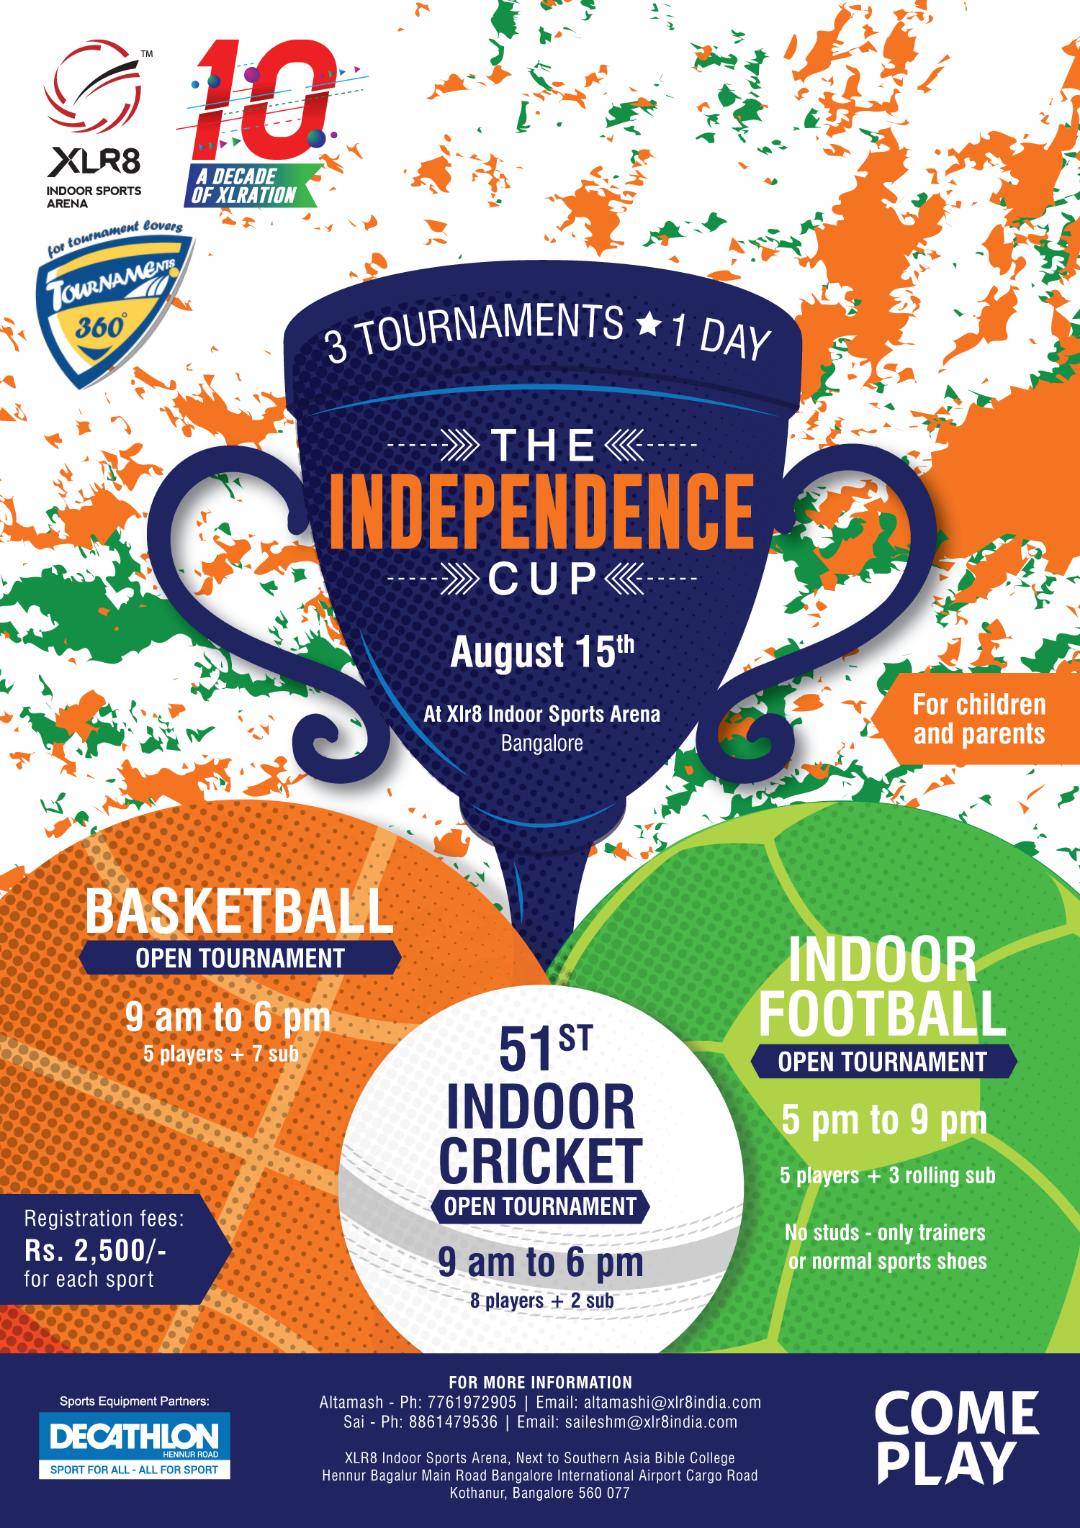 The Independence Cup